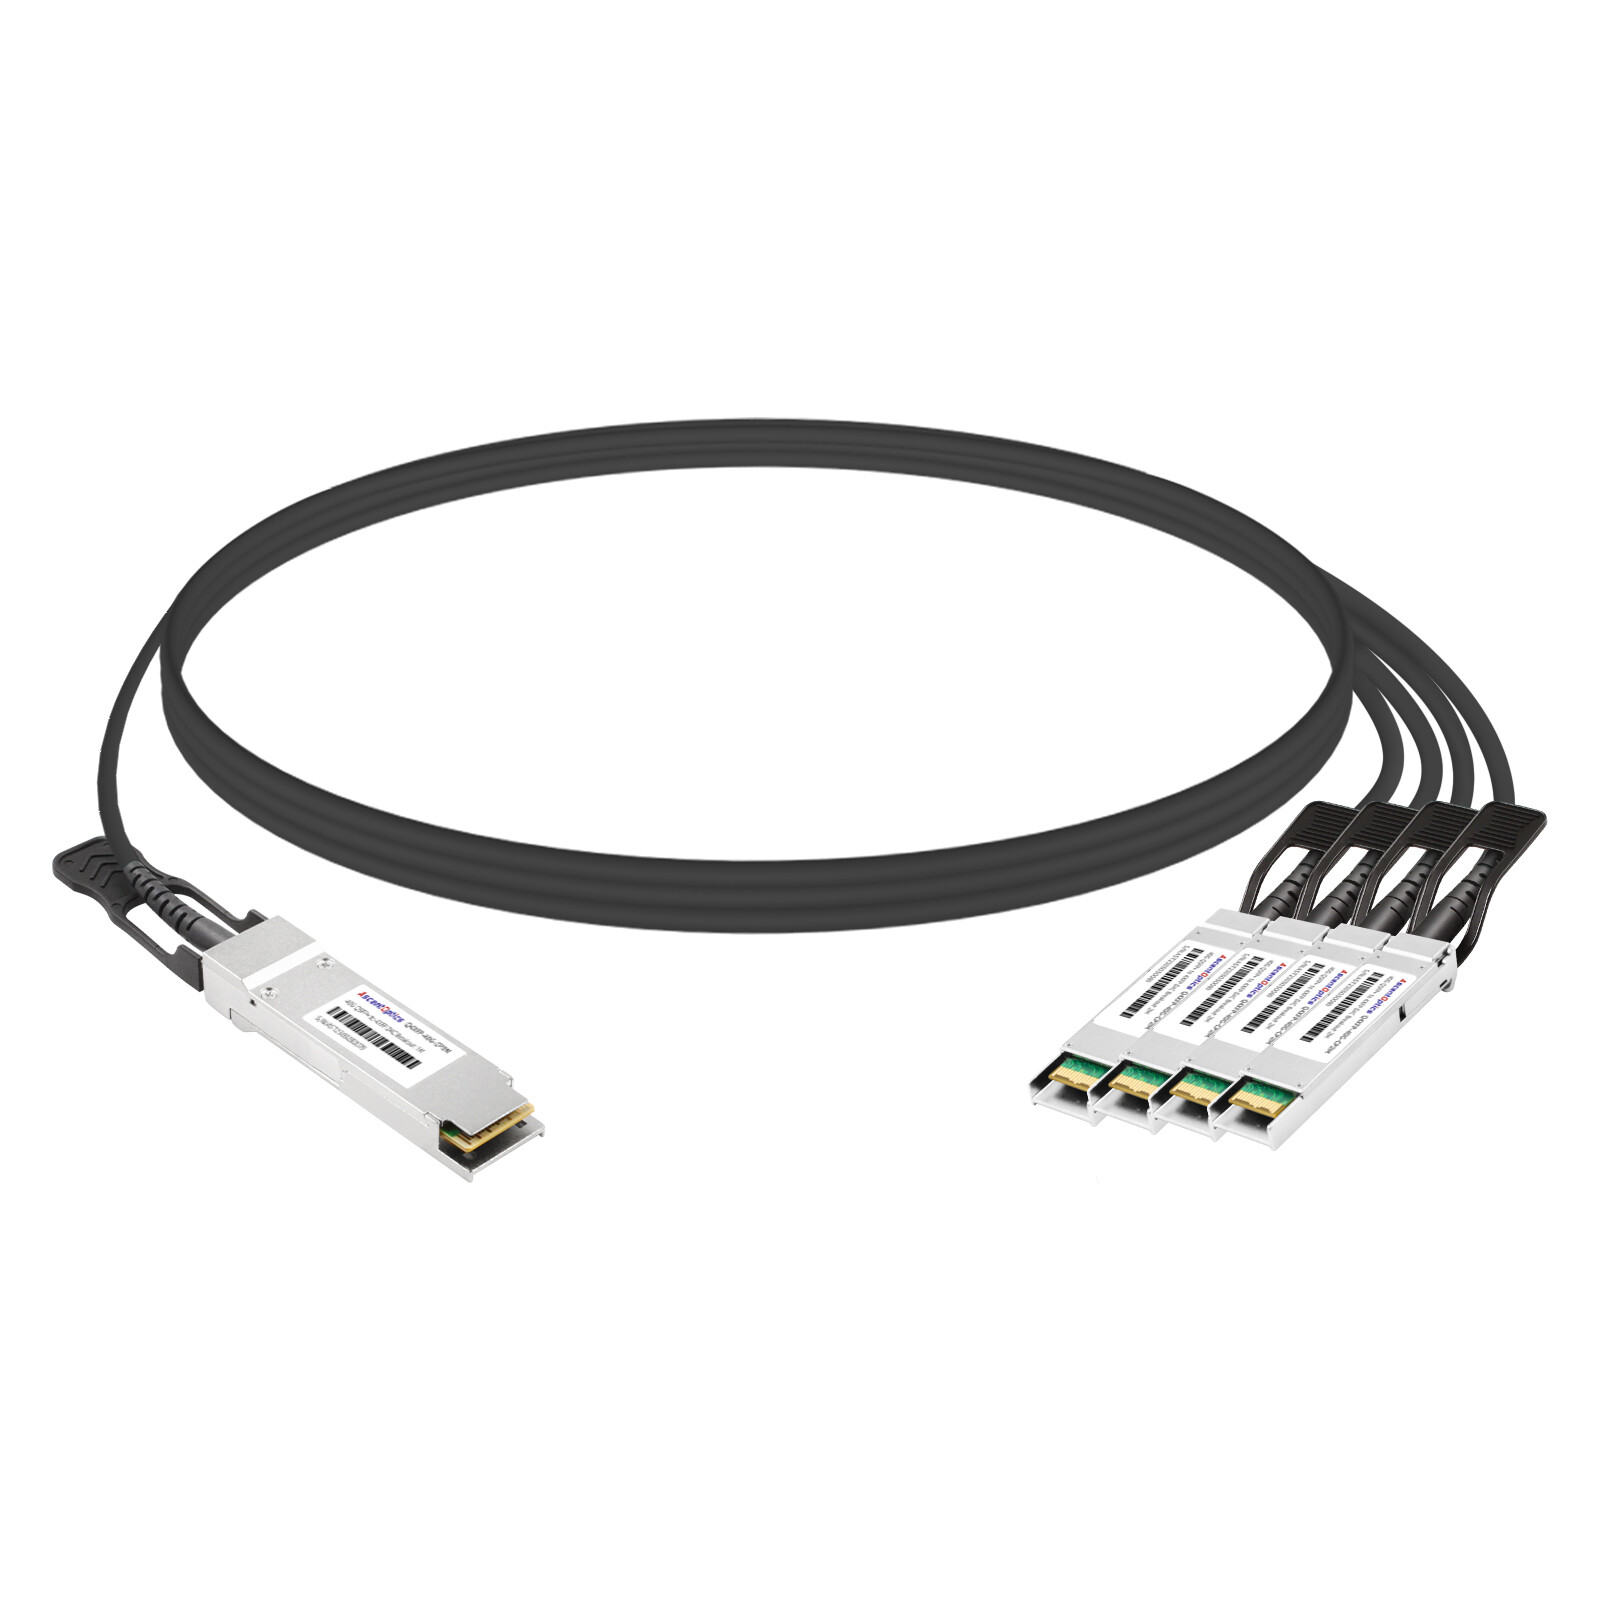 40G QSFP+ to 4x 10G XFP Copper Breakout Cable,1 Meter,Passive